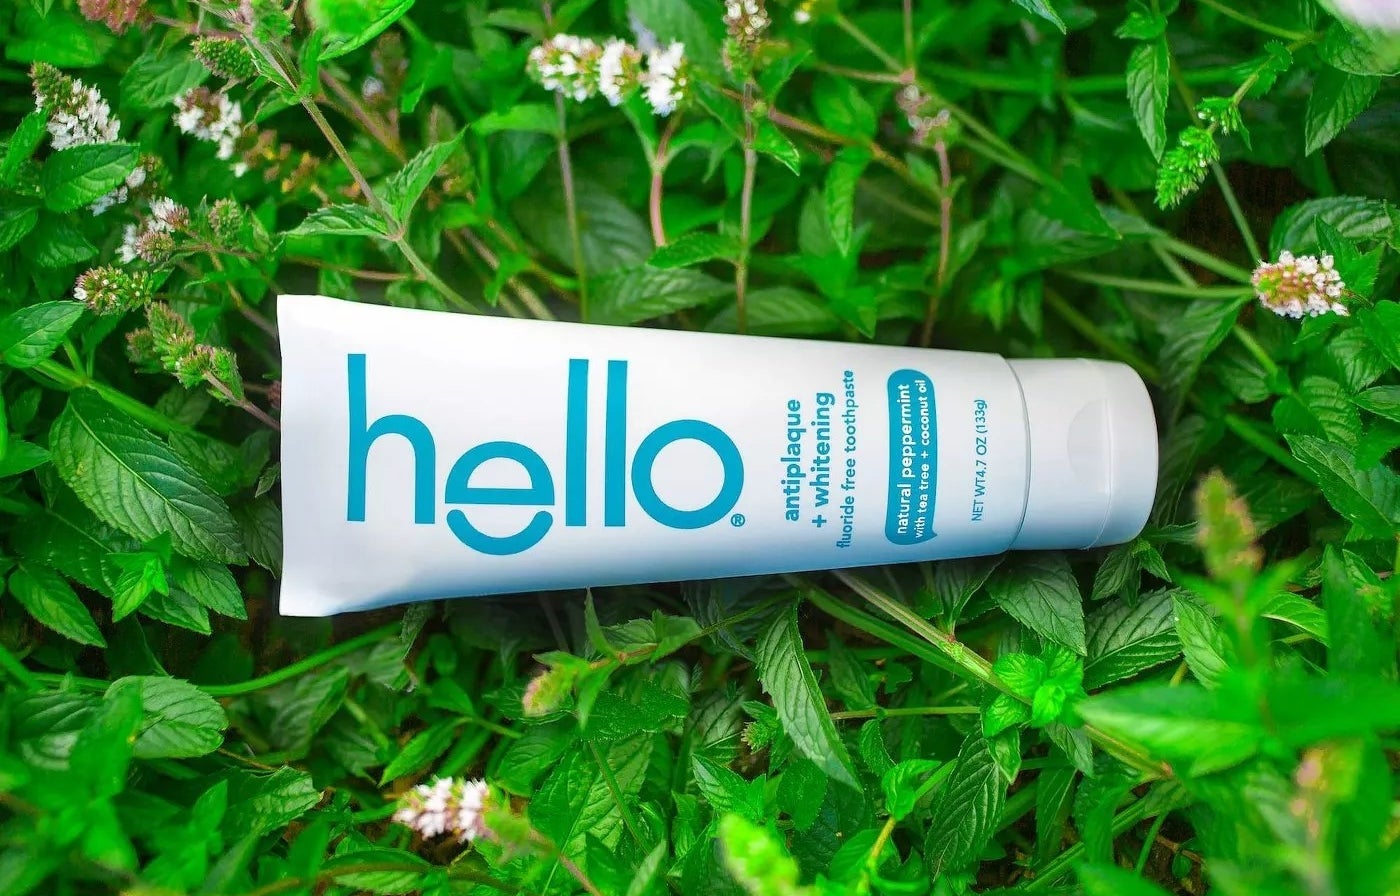 A bottle of Hello antiplaque + whitening fluoride toothpaste with a natural peppermint flavor